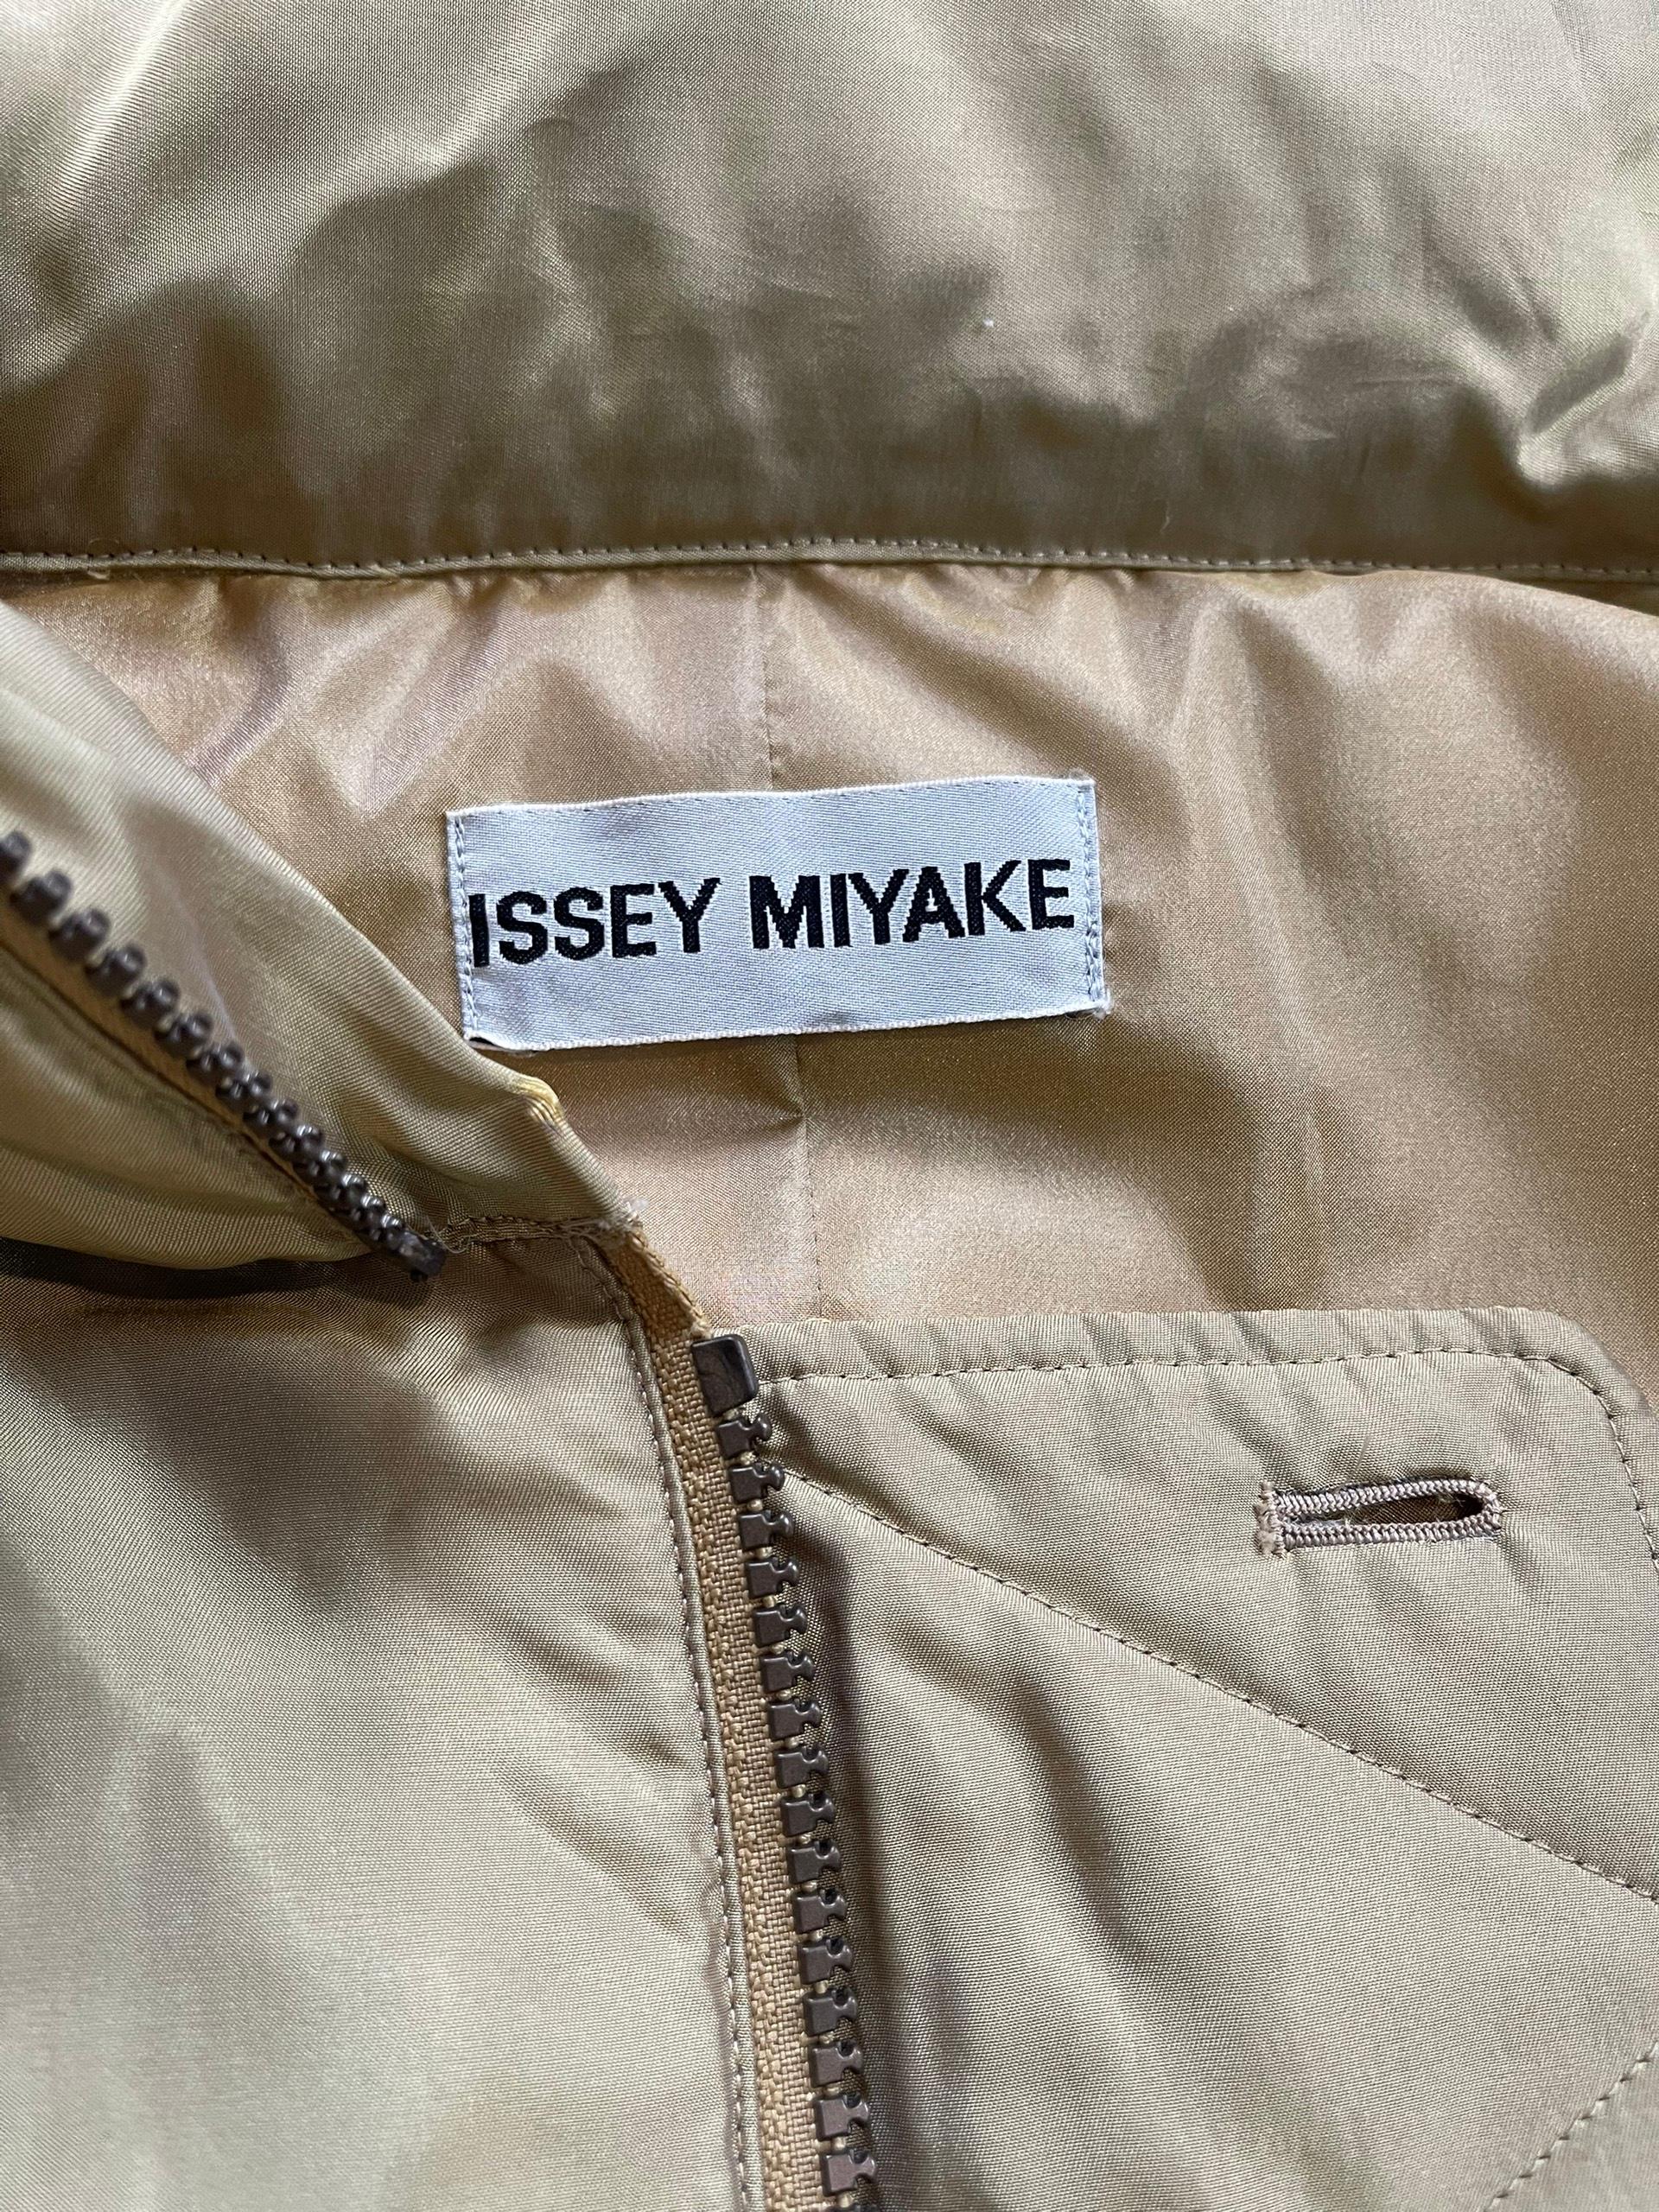 Issey Miyake A/W1995 Space Hood Puffer Coat In Good Condition For Sale In Seattle, WA